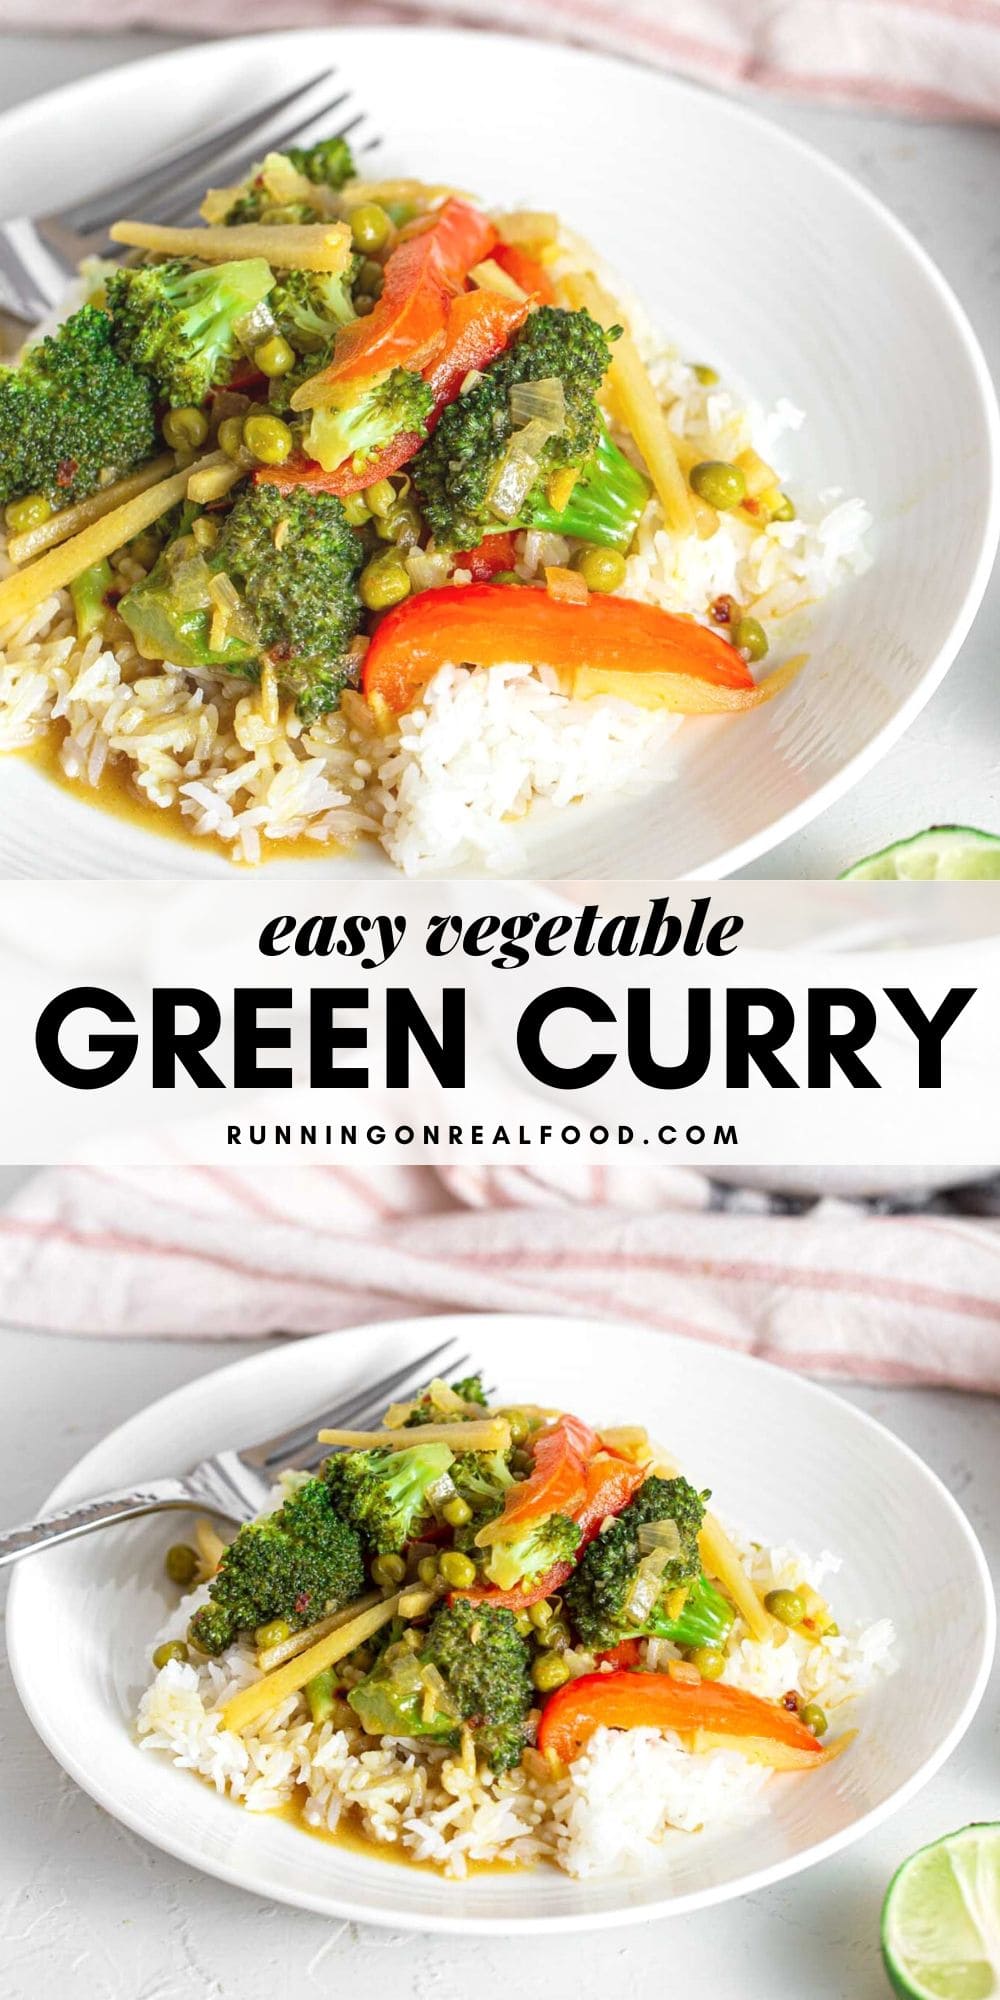 Pinterest graphic with an image and text for a Thai green curry with vegetables.